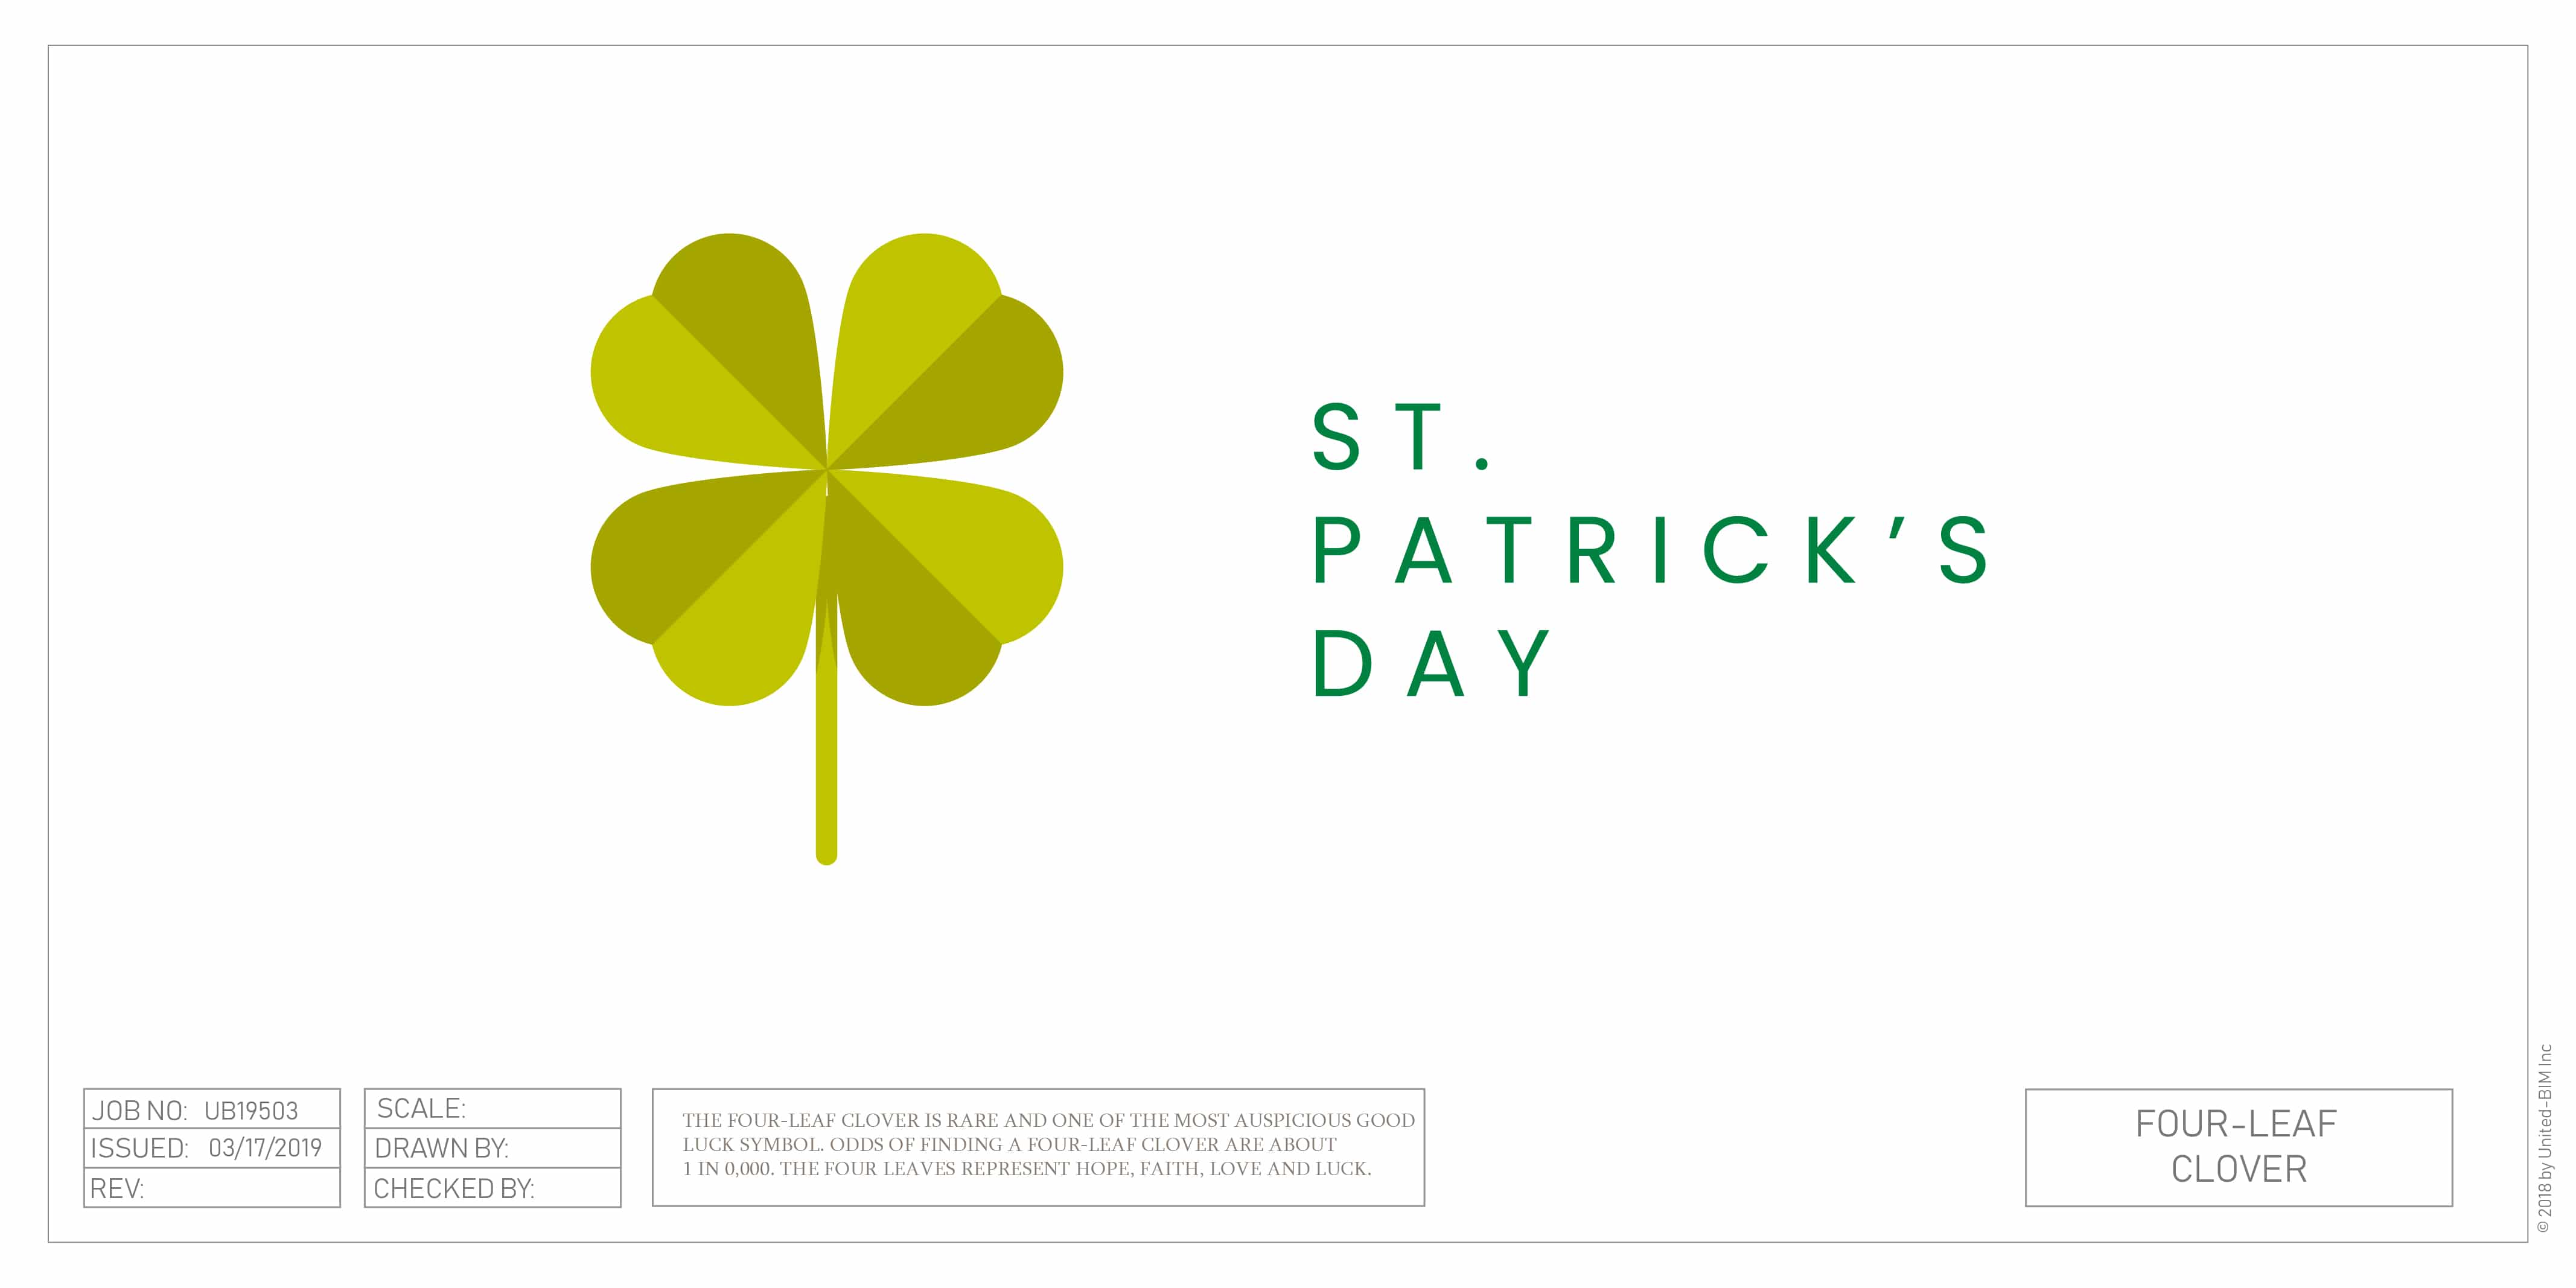 St. Patrick's Day | Graphic by United-BIM